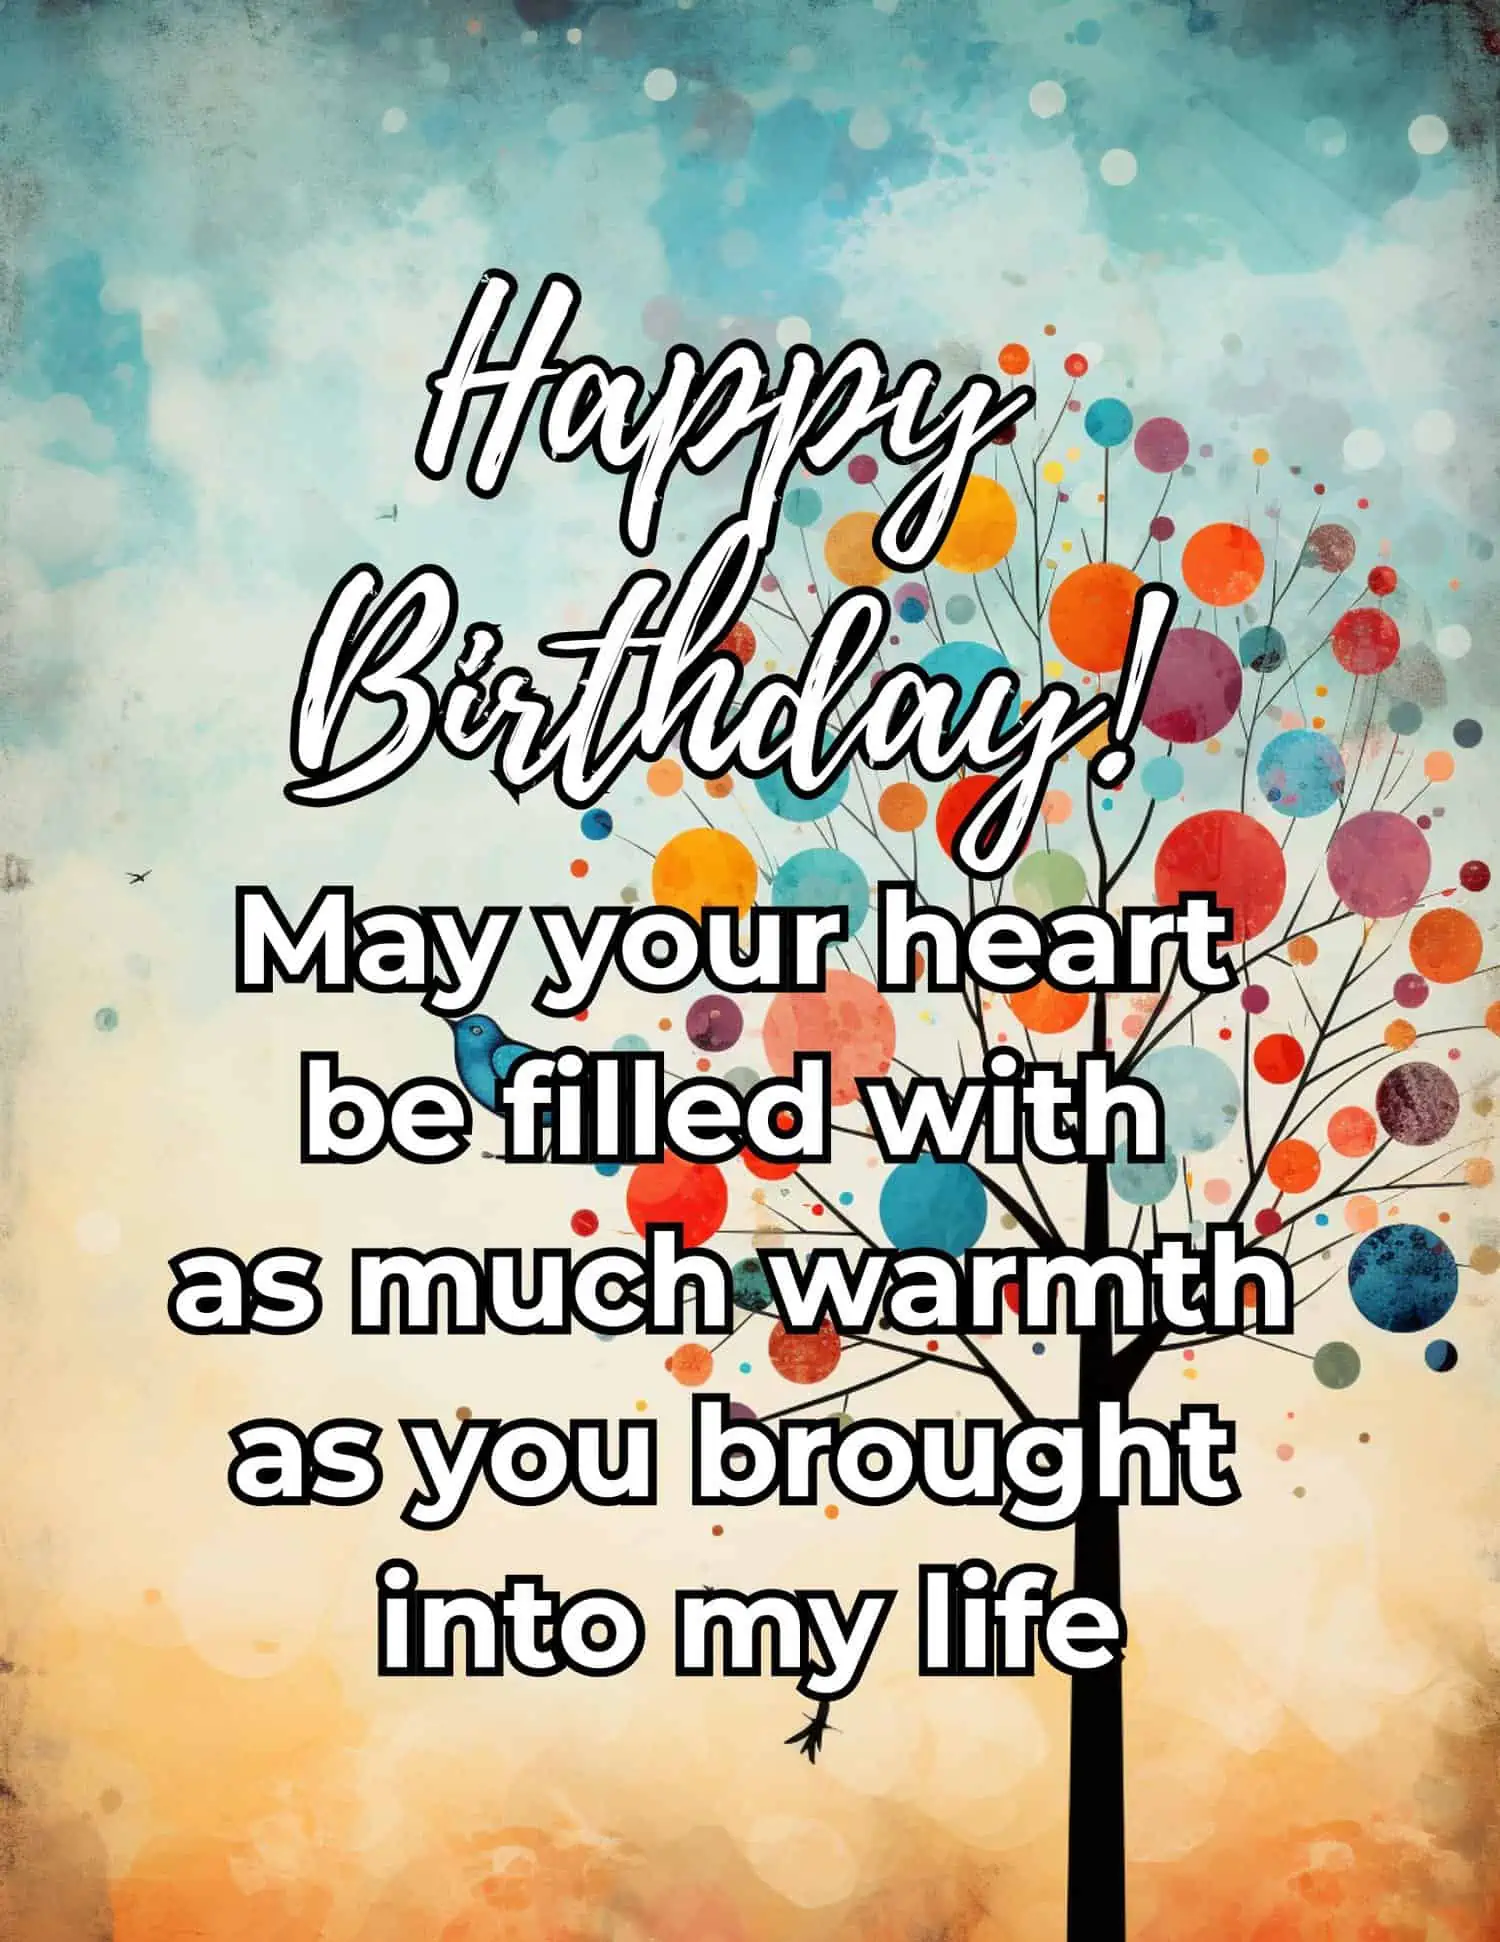 A collection of heartfelt and emotional birthday wishes for an ex-boyfriend, each accompanied by a personal reflection on the depth and sincerity of the message.